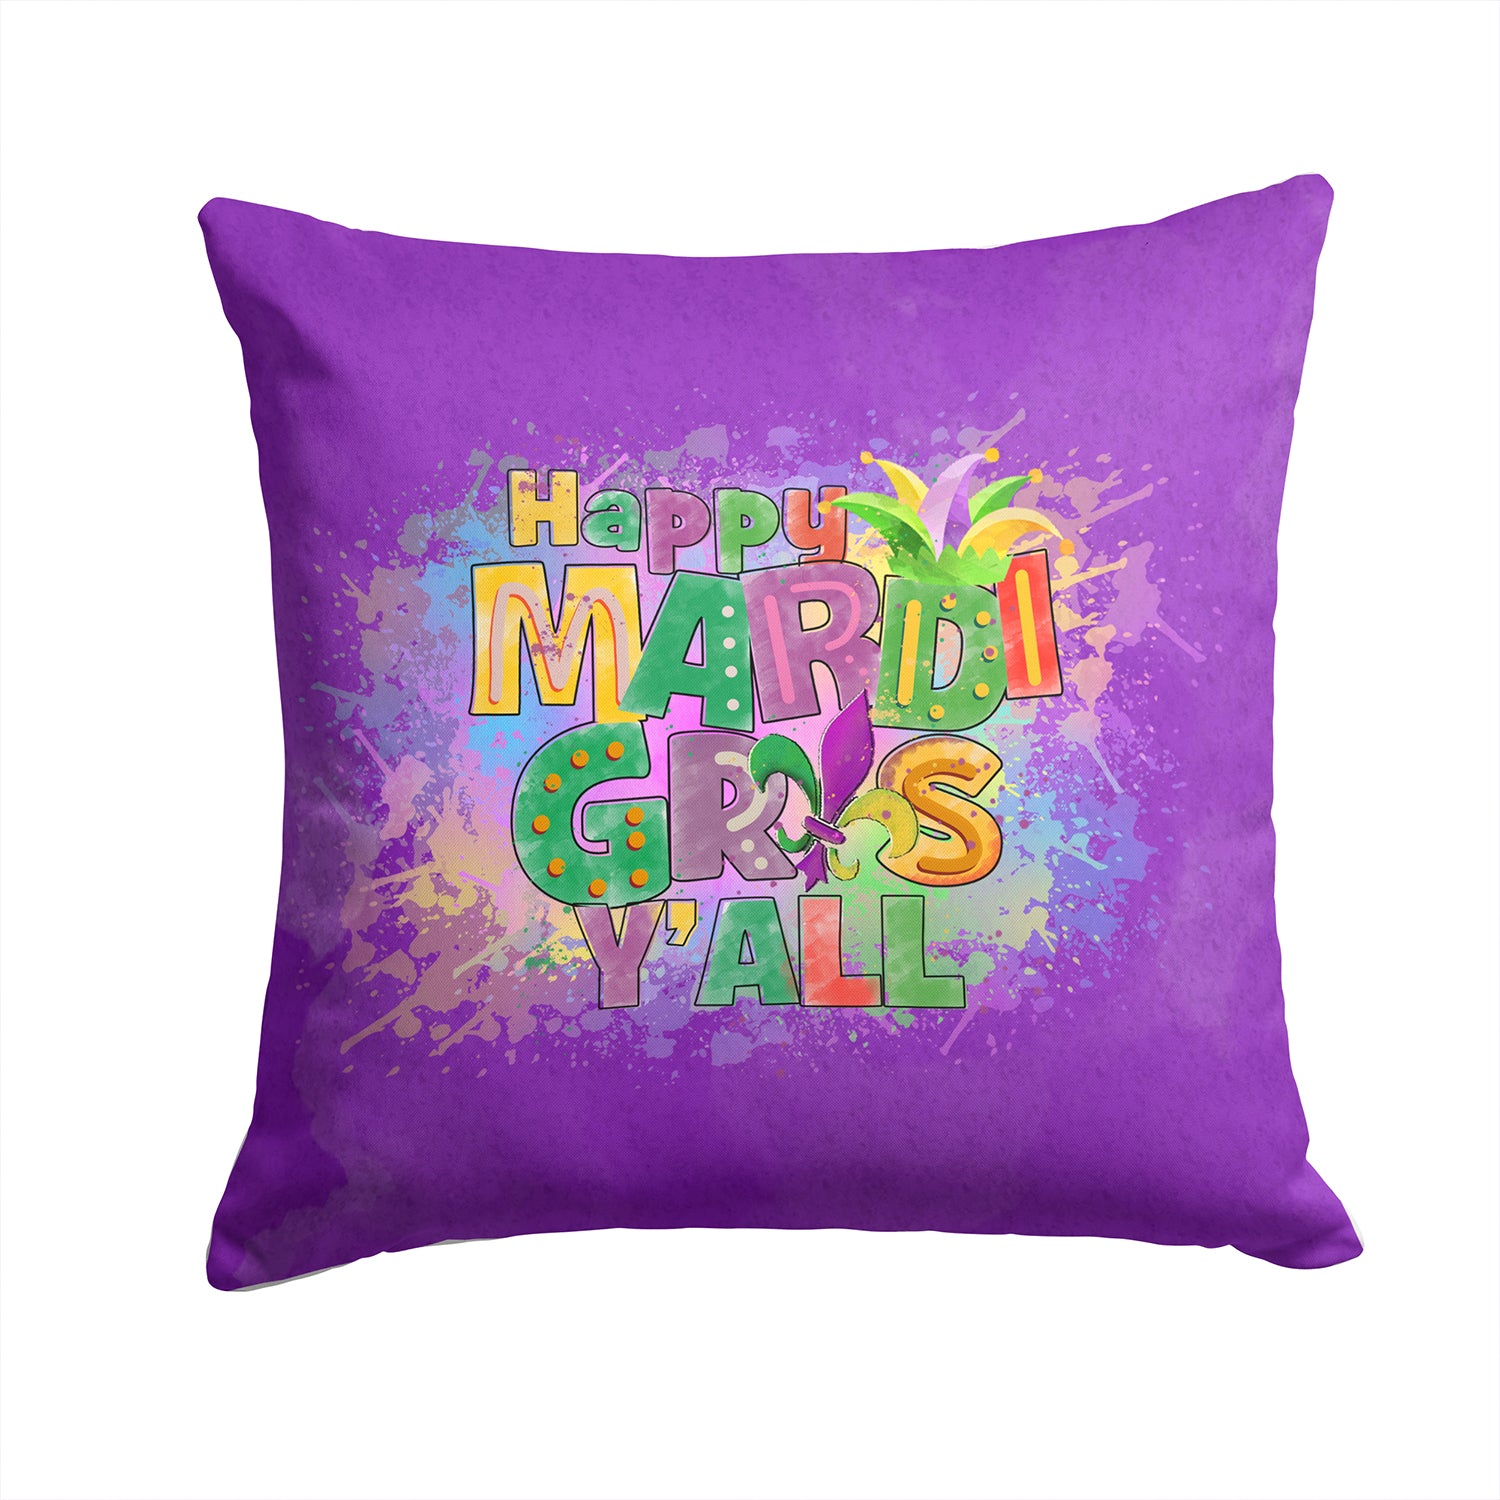 Buy this Happy Mardi Gras Y'all Fabric Decorative Pillow